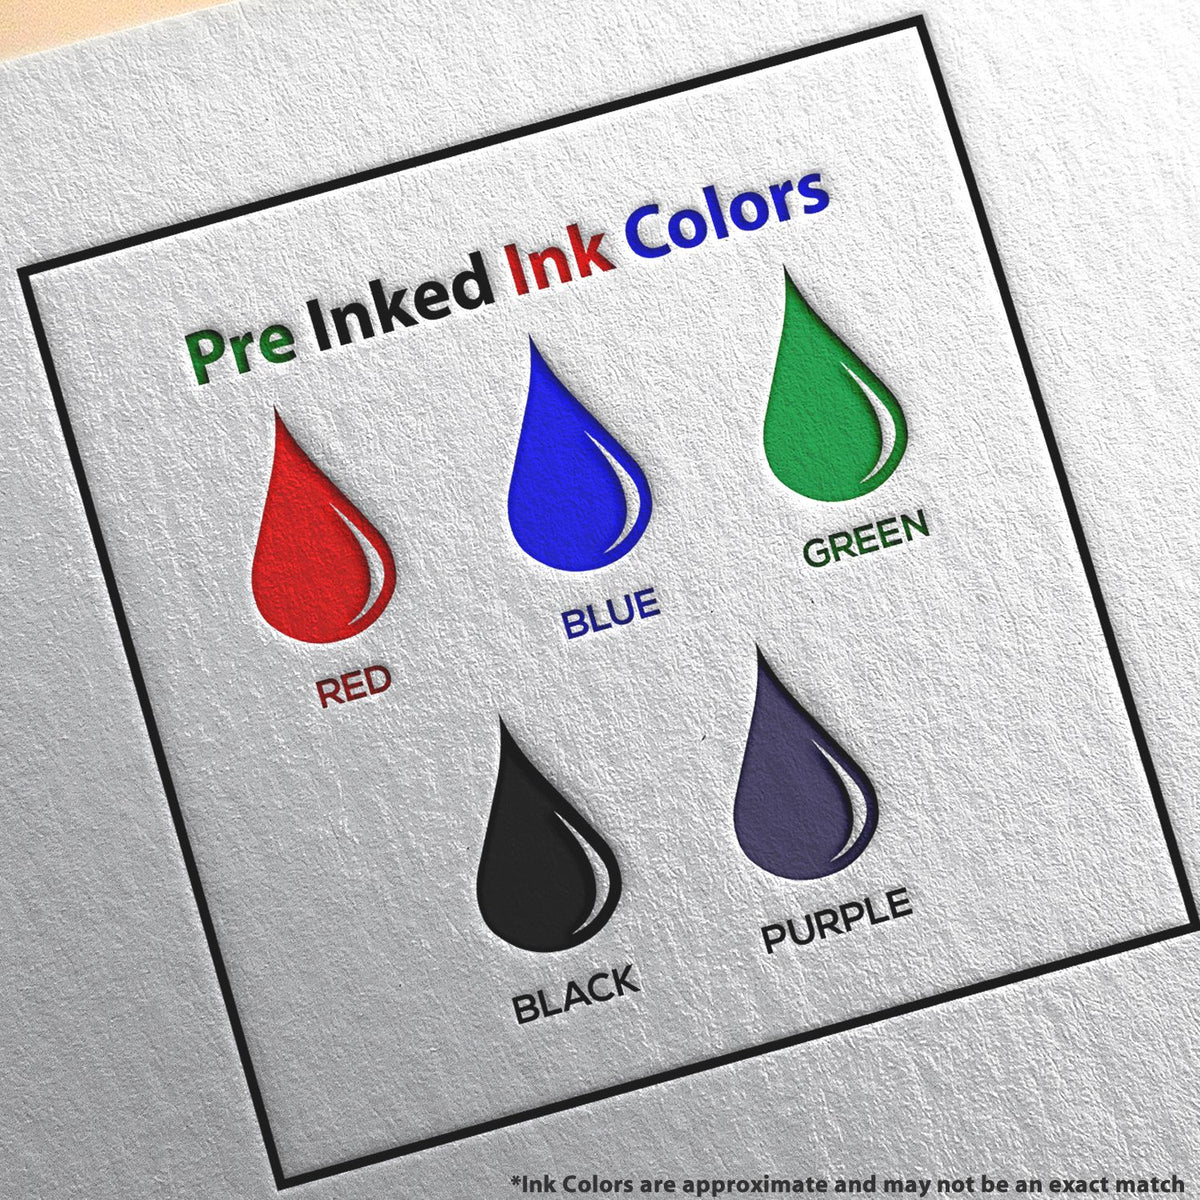 A picture showing the different ink colors or hues available for the Slim Pre-Inked North Carolina Professional Engineer Seal Stamp product.